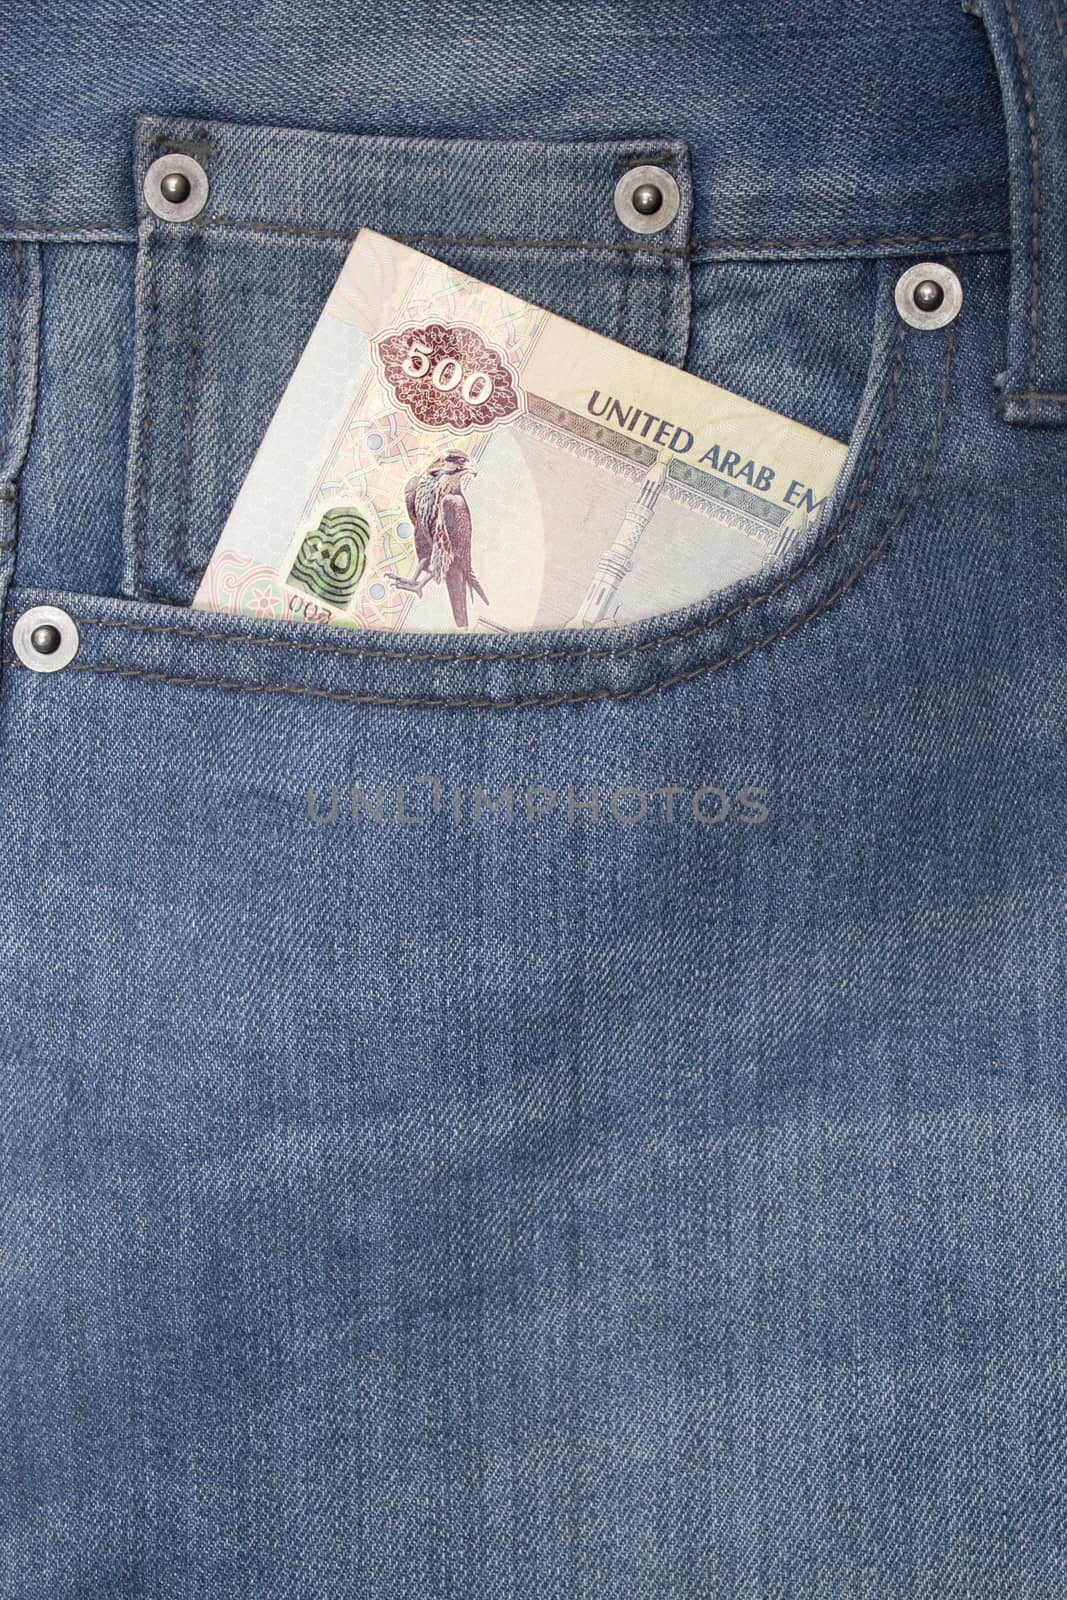 Pocket with money by asajdler